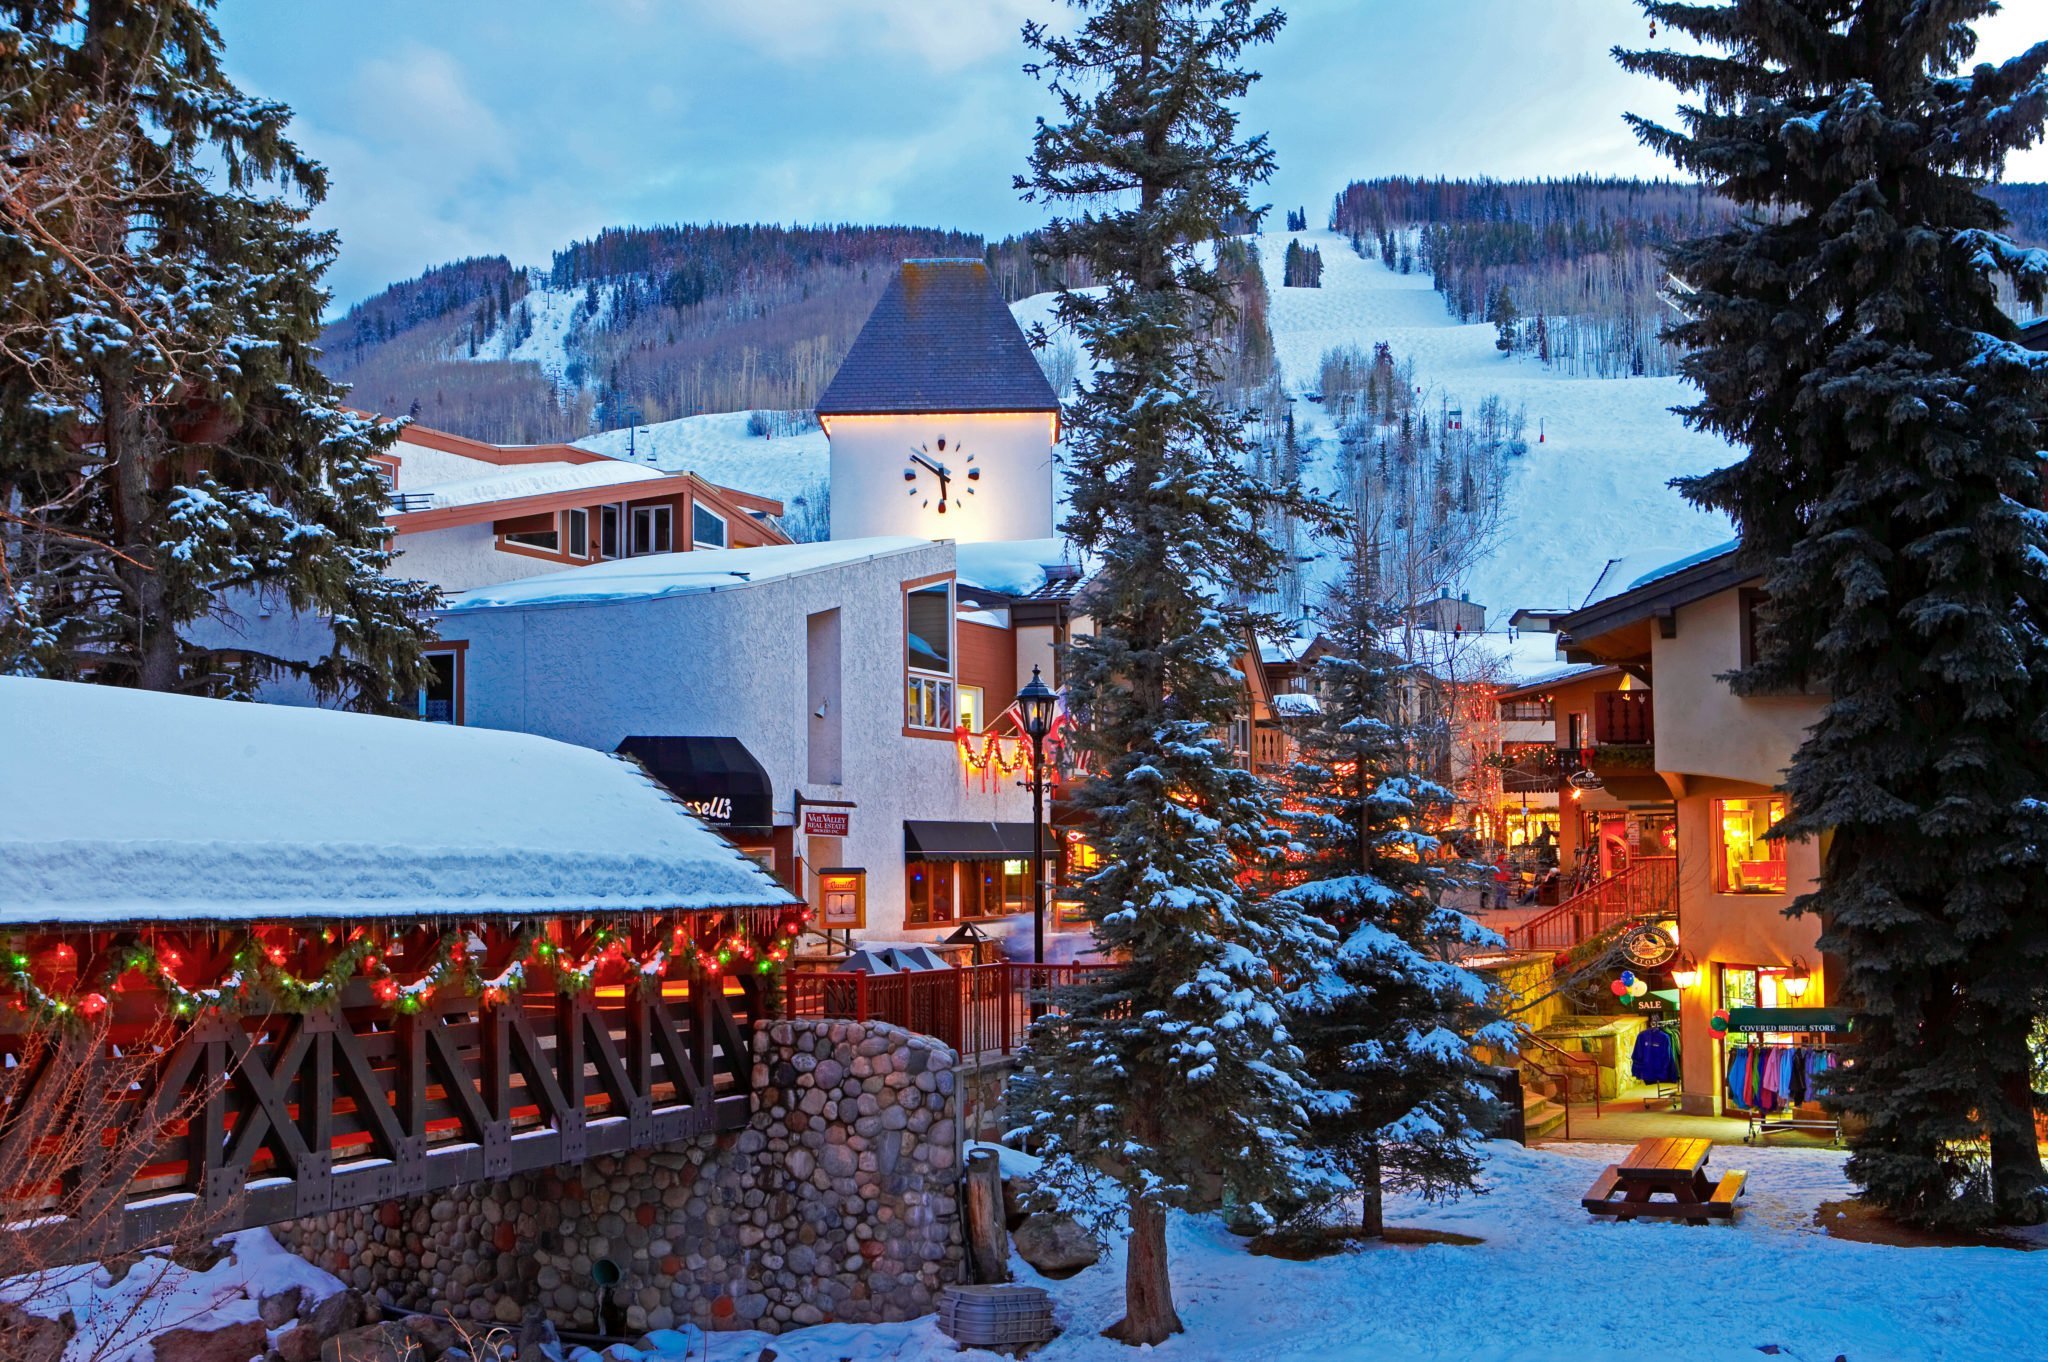 The Magical Destinations of Aspen, Telluride and Vail at the Holidays